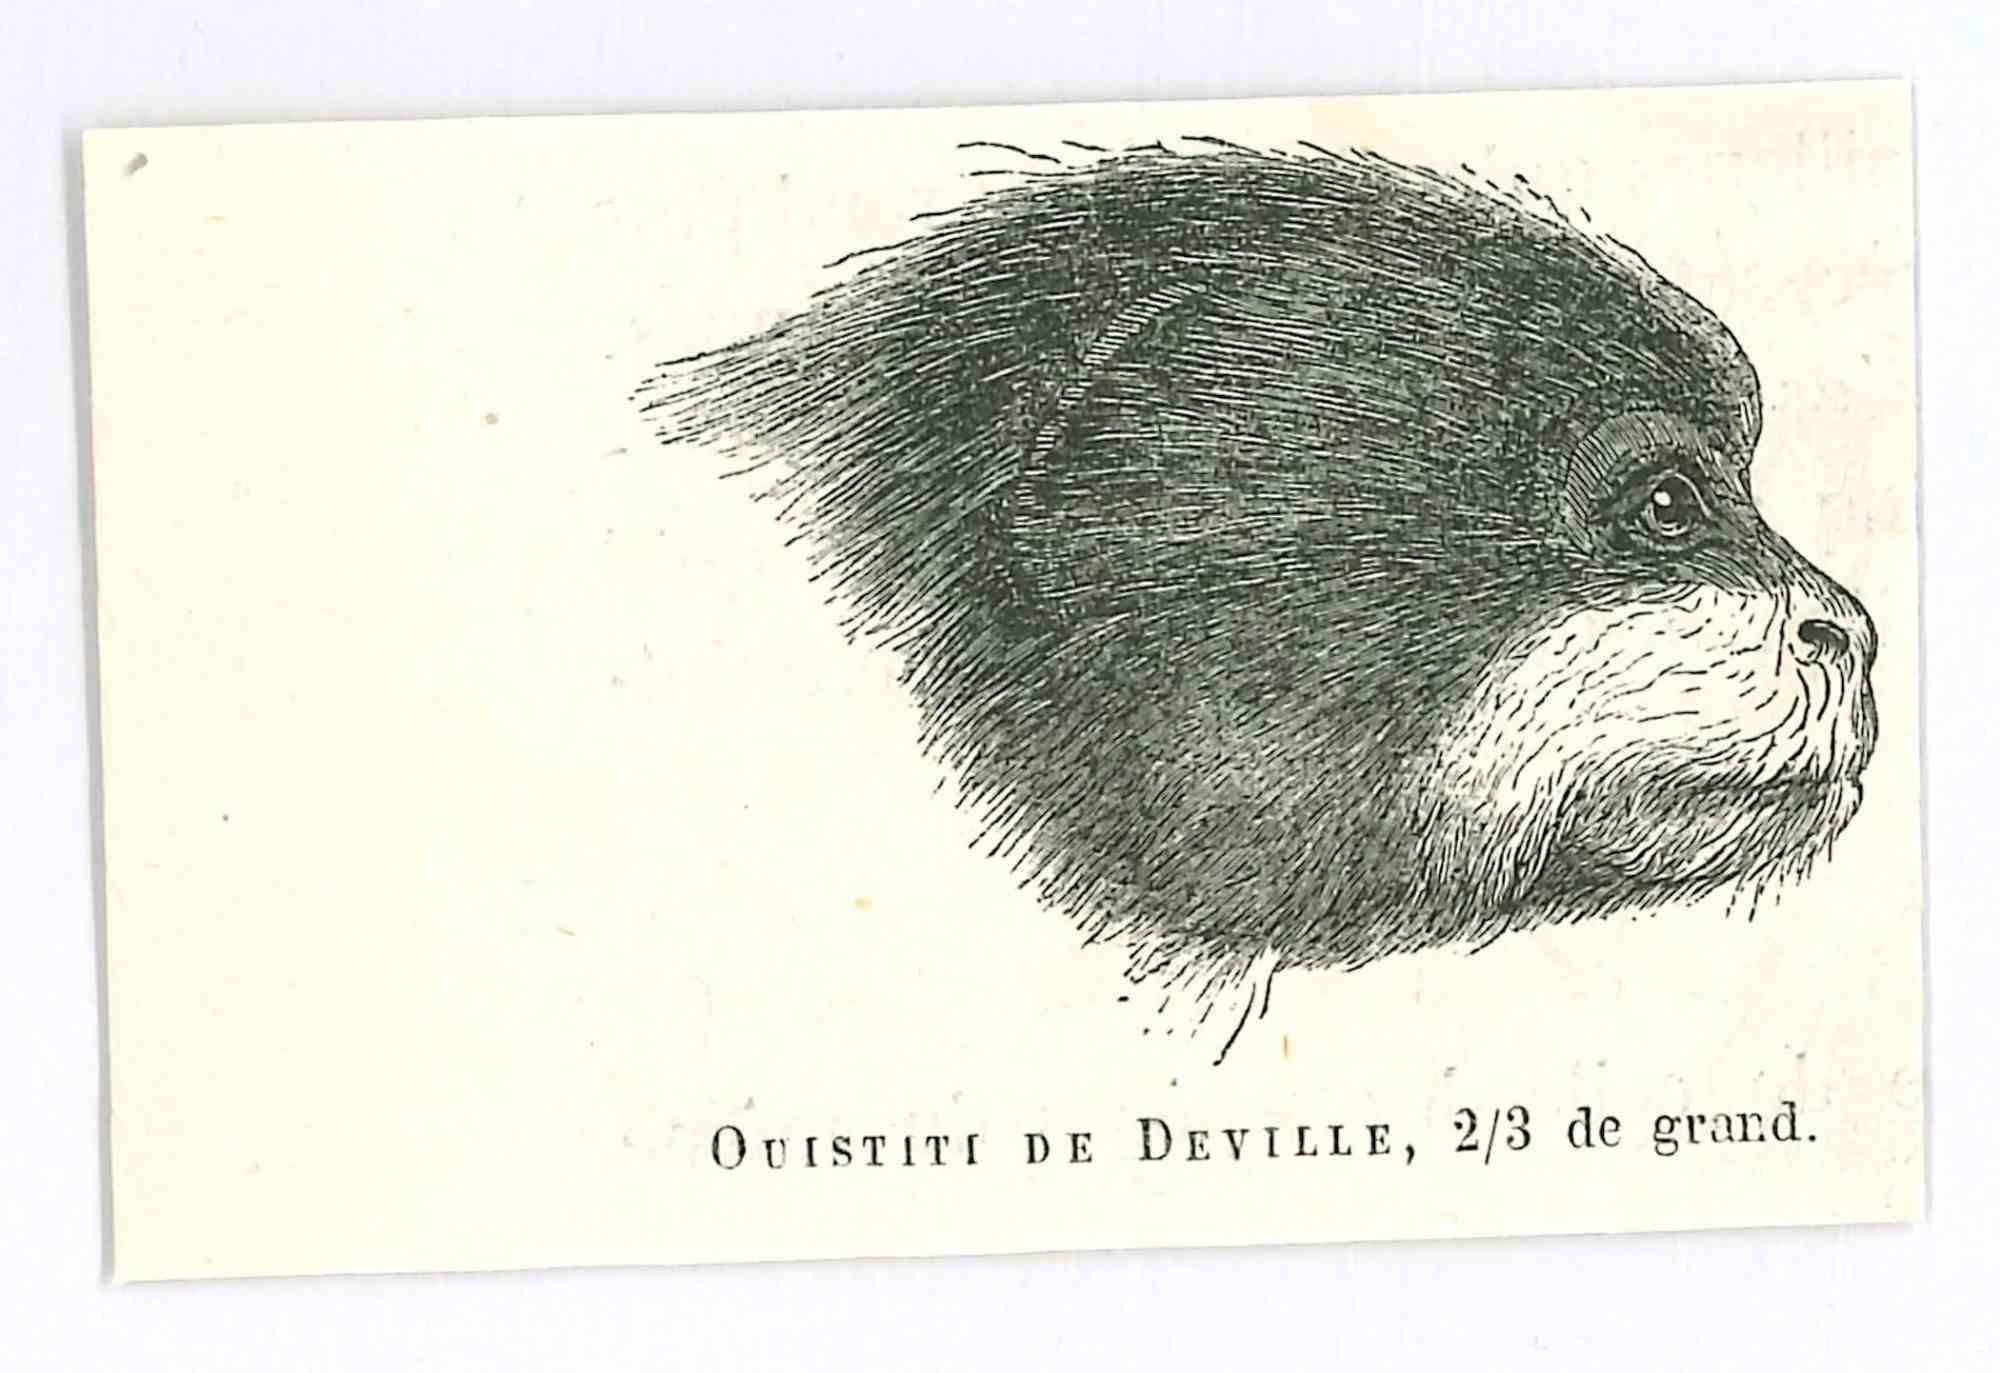 Marmosets is an original lithograph on ivory-colored paper, realized by Paul Gervais (1816-1879). The artwork is from The Series of "Les Trois Règnes de la Nature", and was published in 1854.

Good conditions.

Titled on the lower. With the notes on